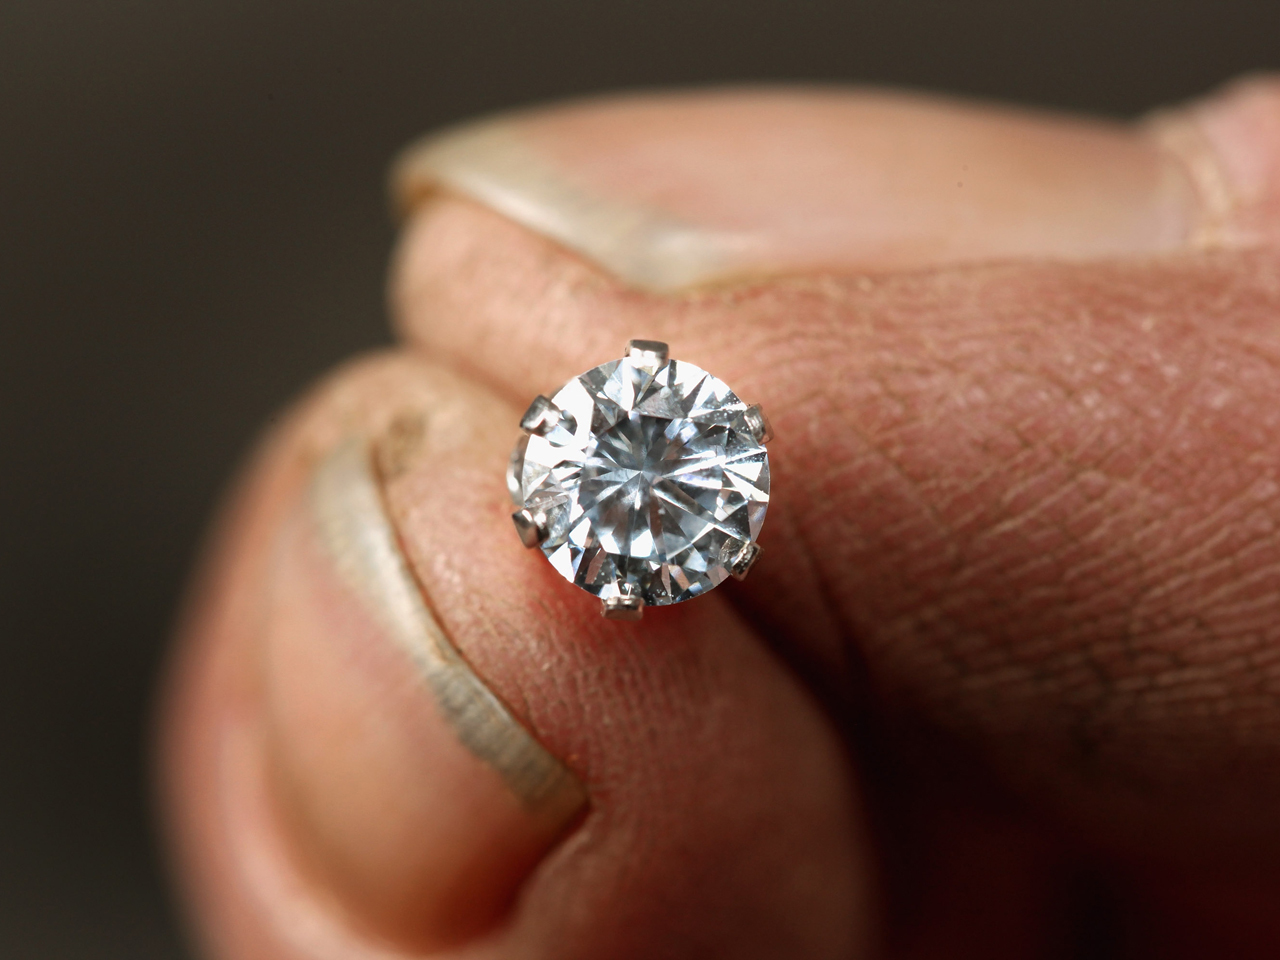 Diamond swallowed by woman, 80, at Florida charity event - CBS News